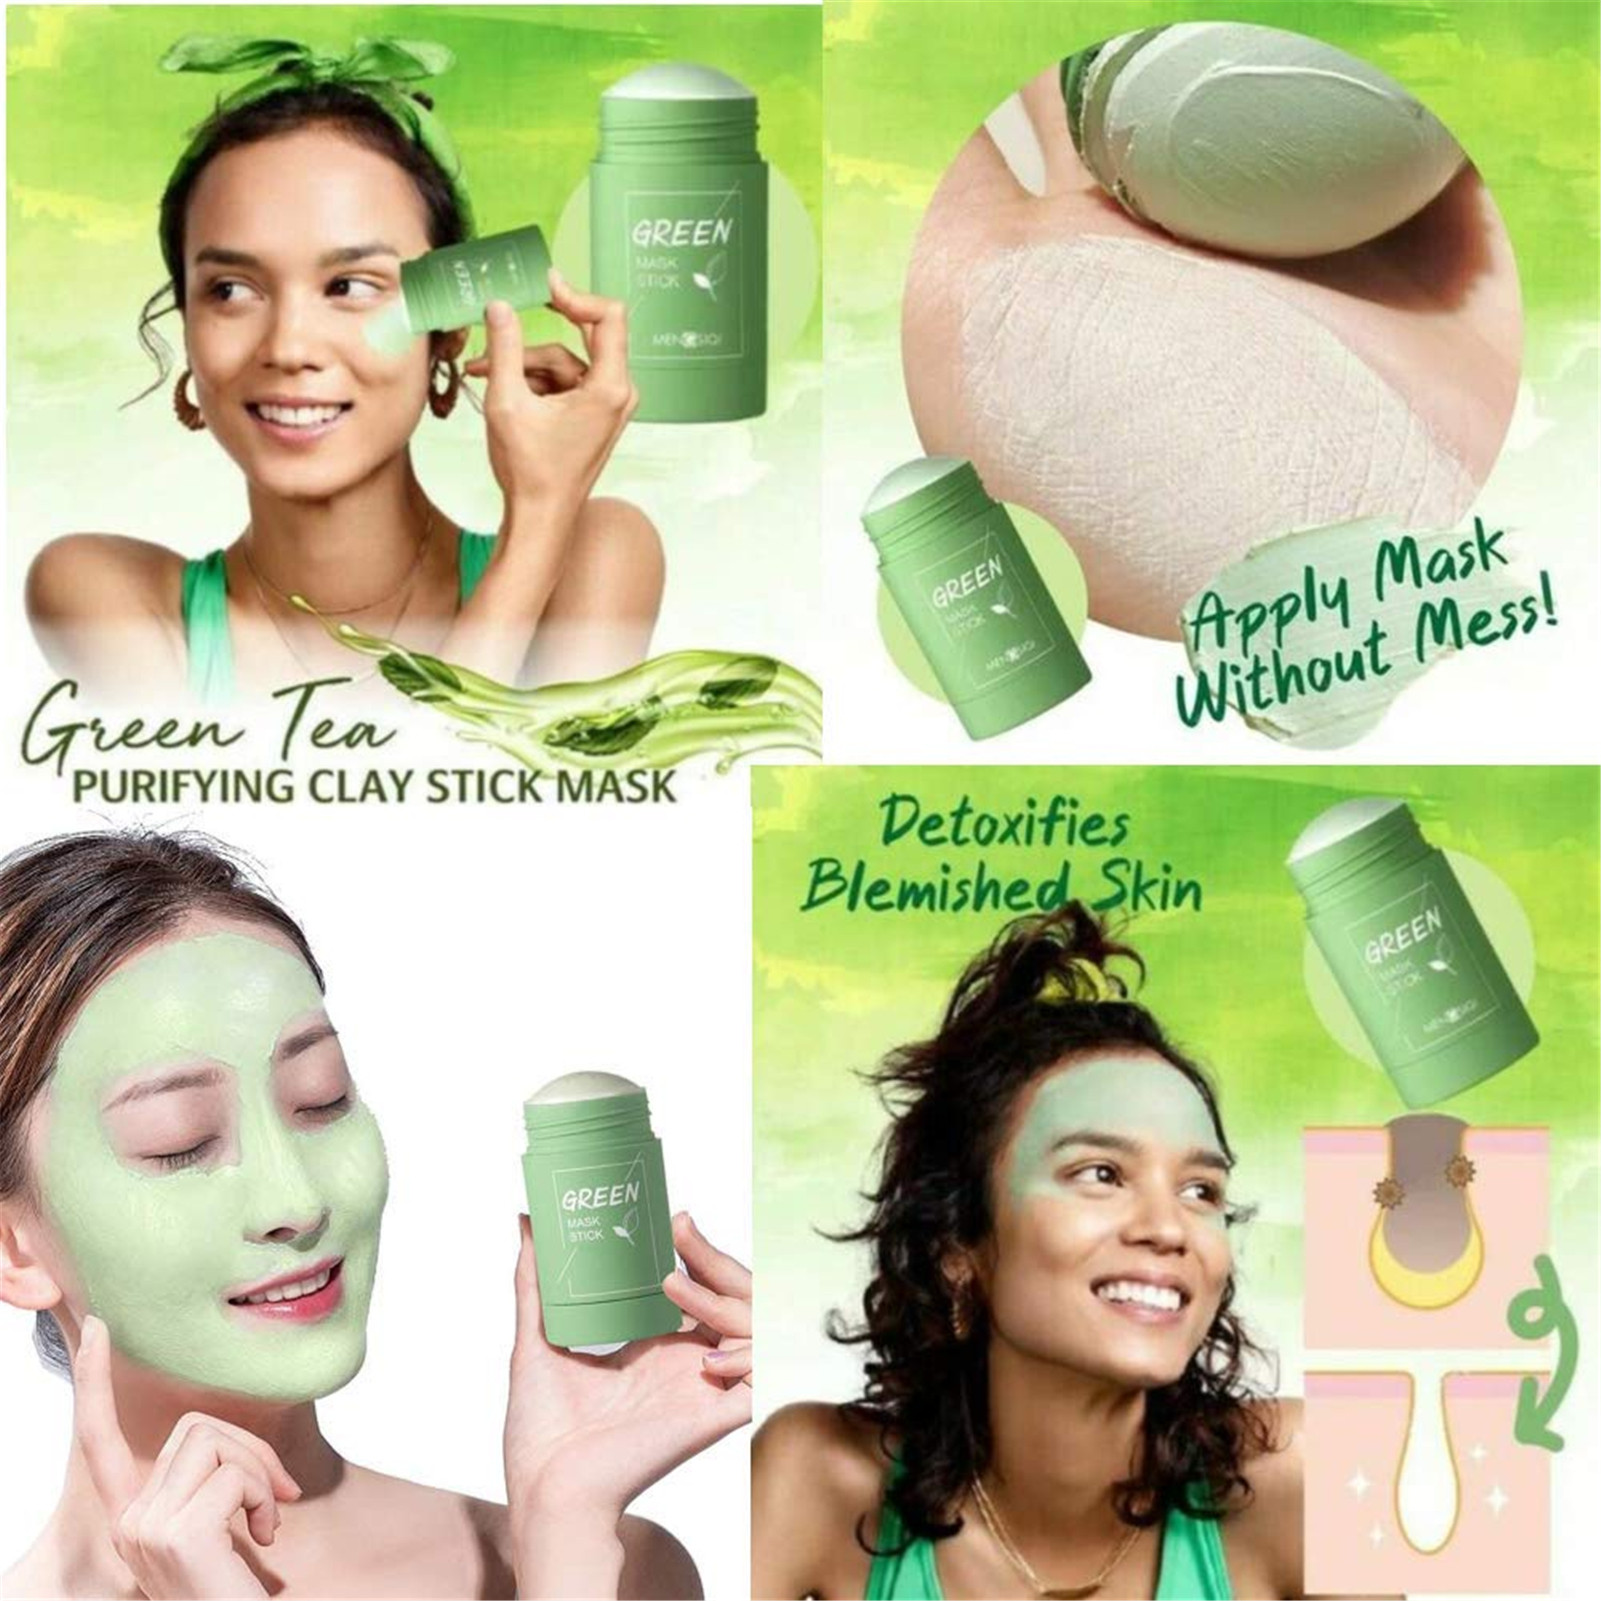 Lankey Green Tea Purifying Clay Stick Mask, Deep Cleansing Moisturizing Anti Acne,Acne Clearing, Blackhead Remover, Improve Texture of The Skin, Regulate Skin Secretion - image 2 of 2